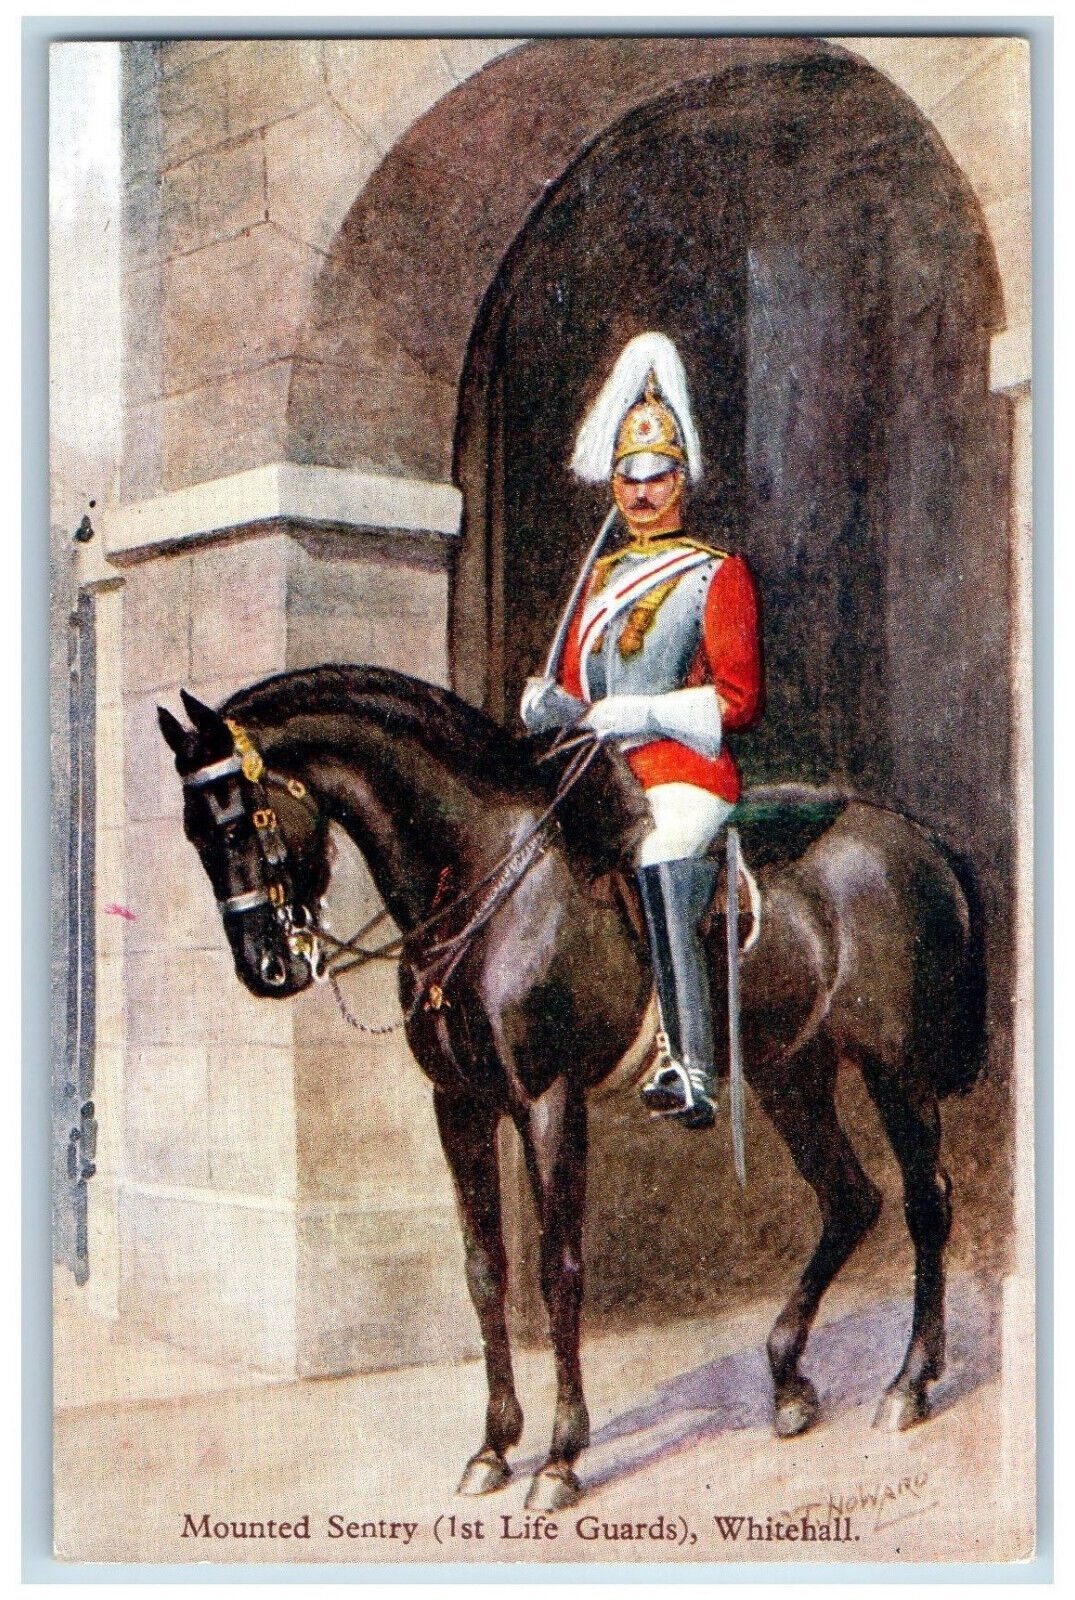 Whitehall London England Postcard Mounted Sentry (1st Life Guards) c1920\'s